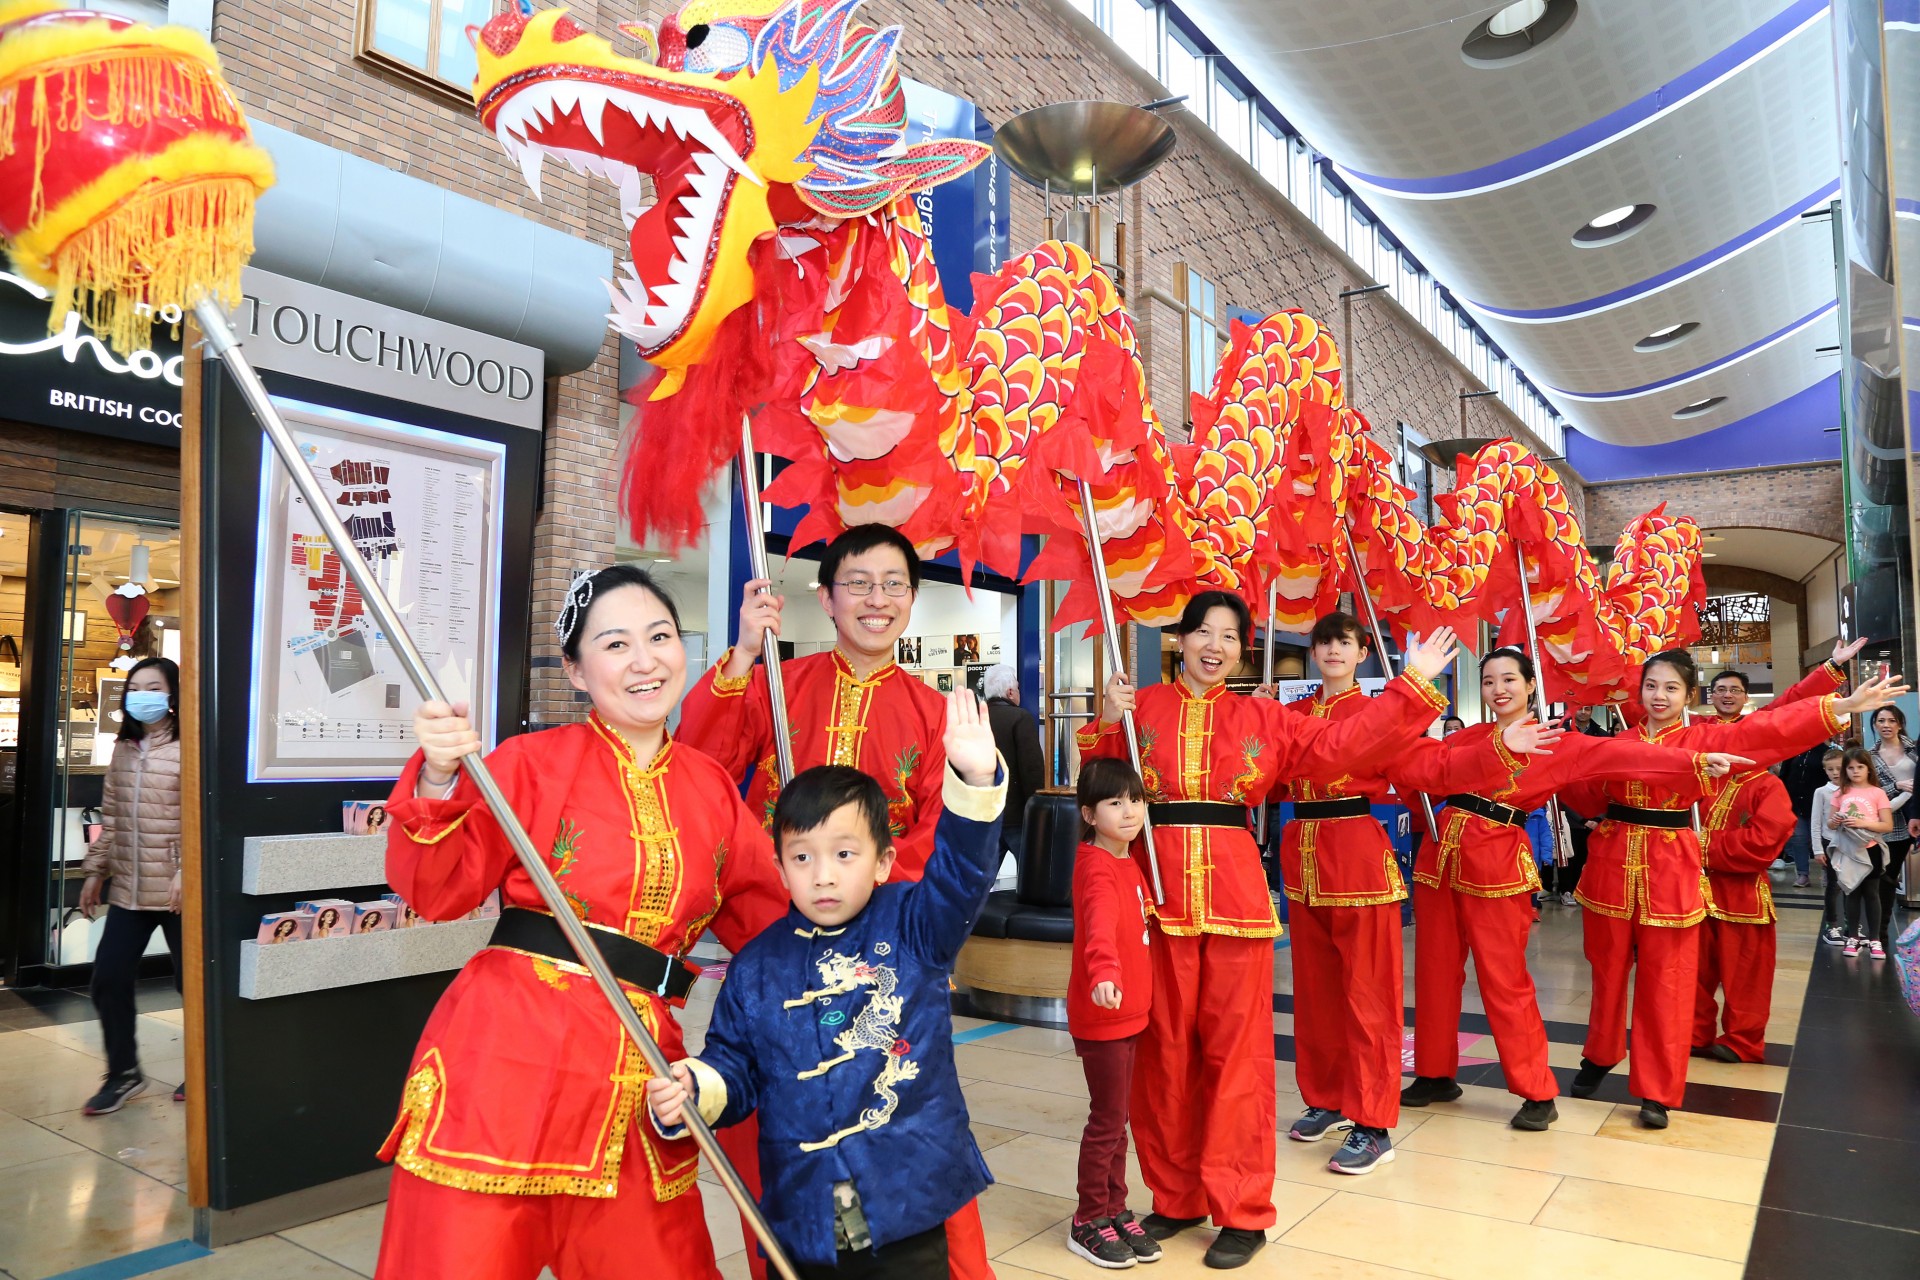 Hop into the year of the rabbit at Touchwood’s Chinese New Year celebration